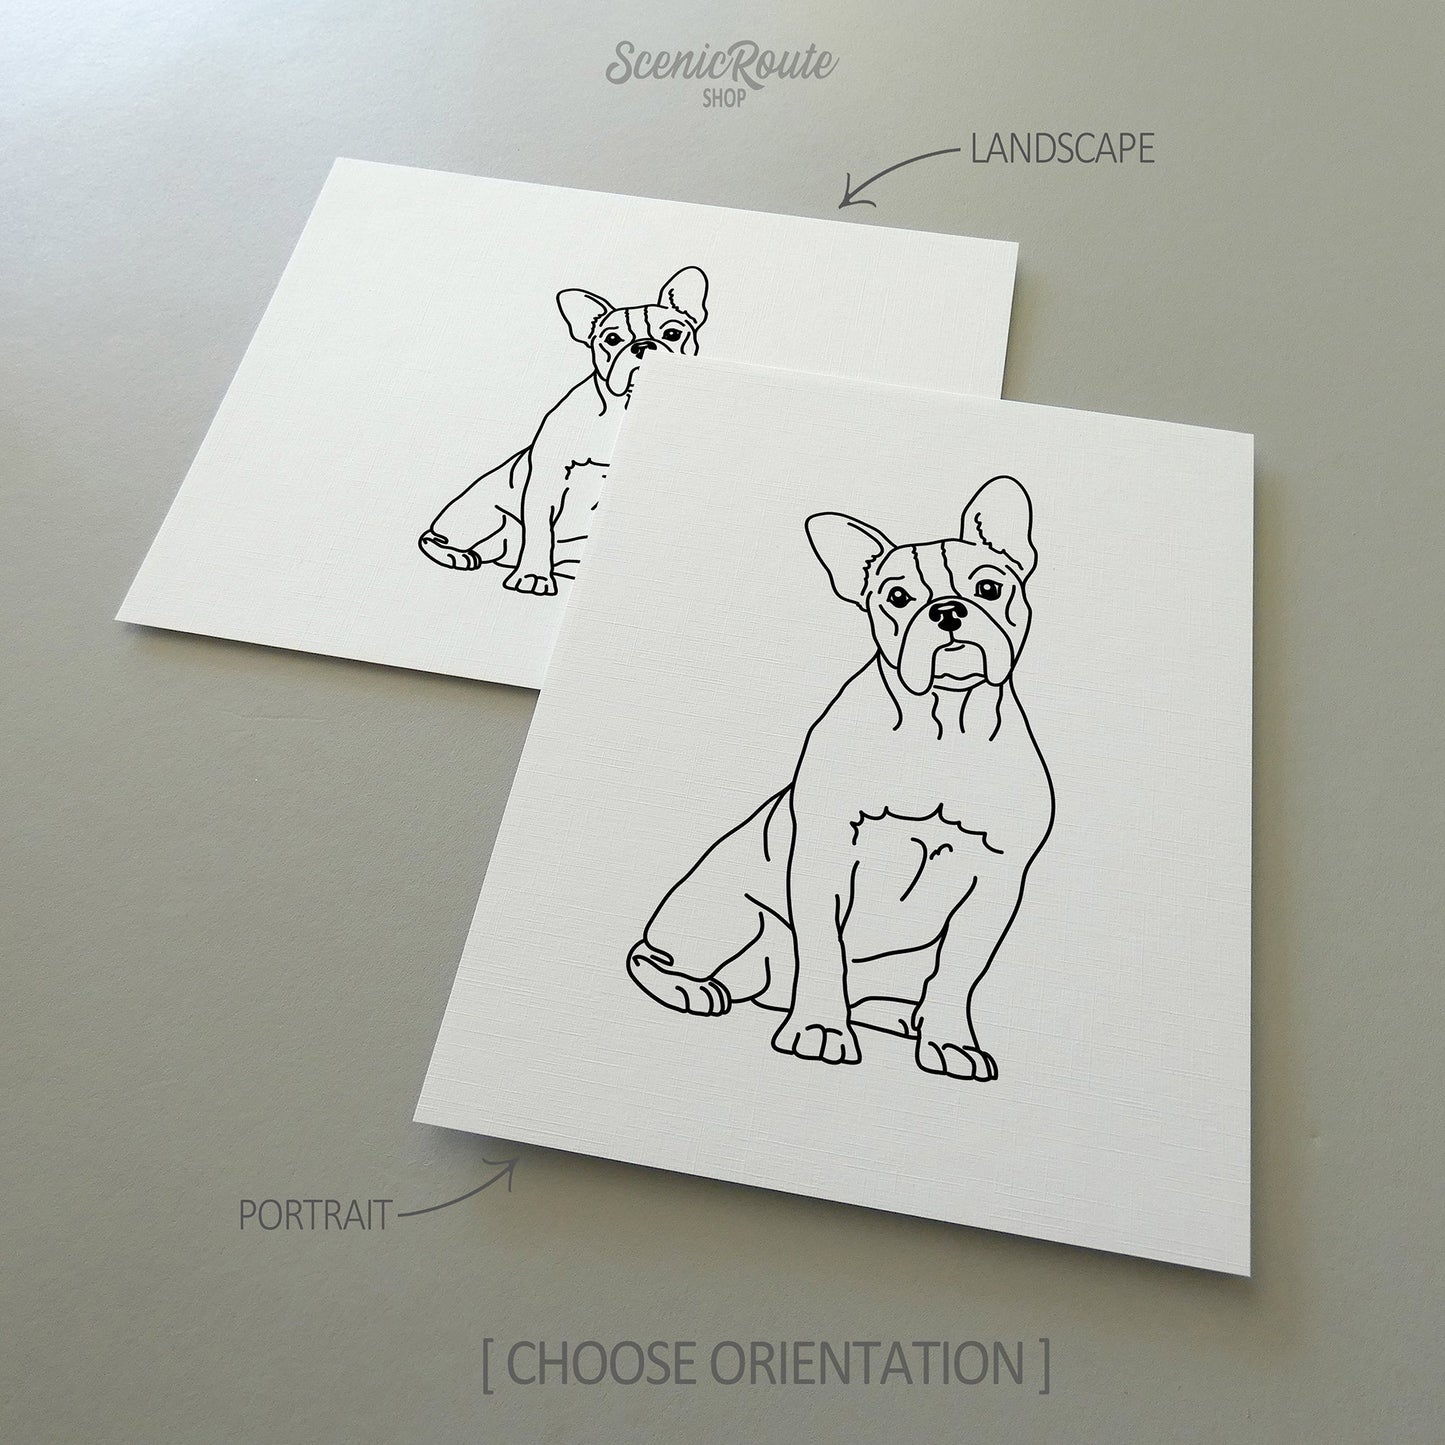 Two drawings of a Boston Terrier dog on white linen paper with a gray background.  Pieces are shown in portrait and landscape orientation options to illustrate the available art print options.